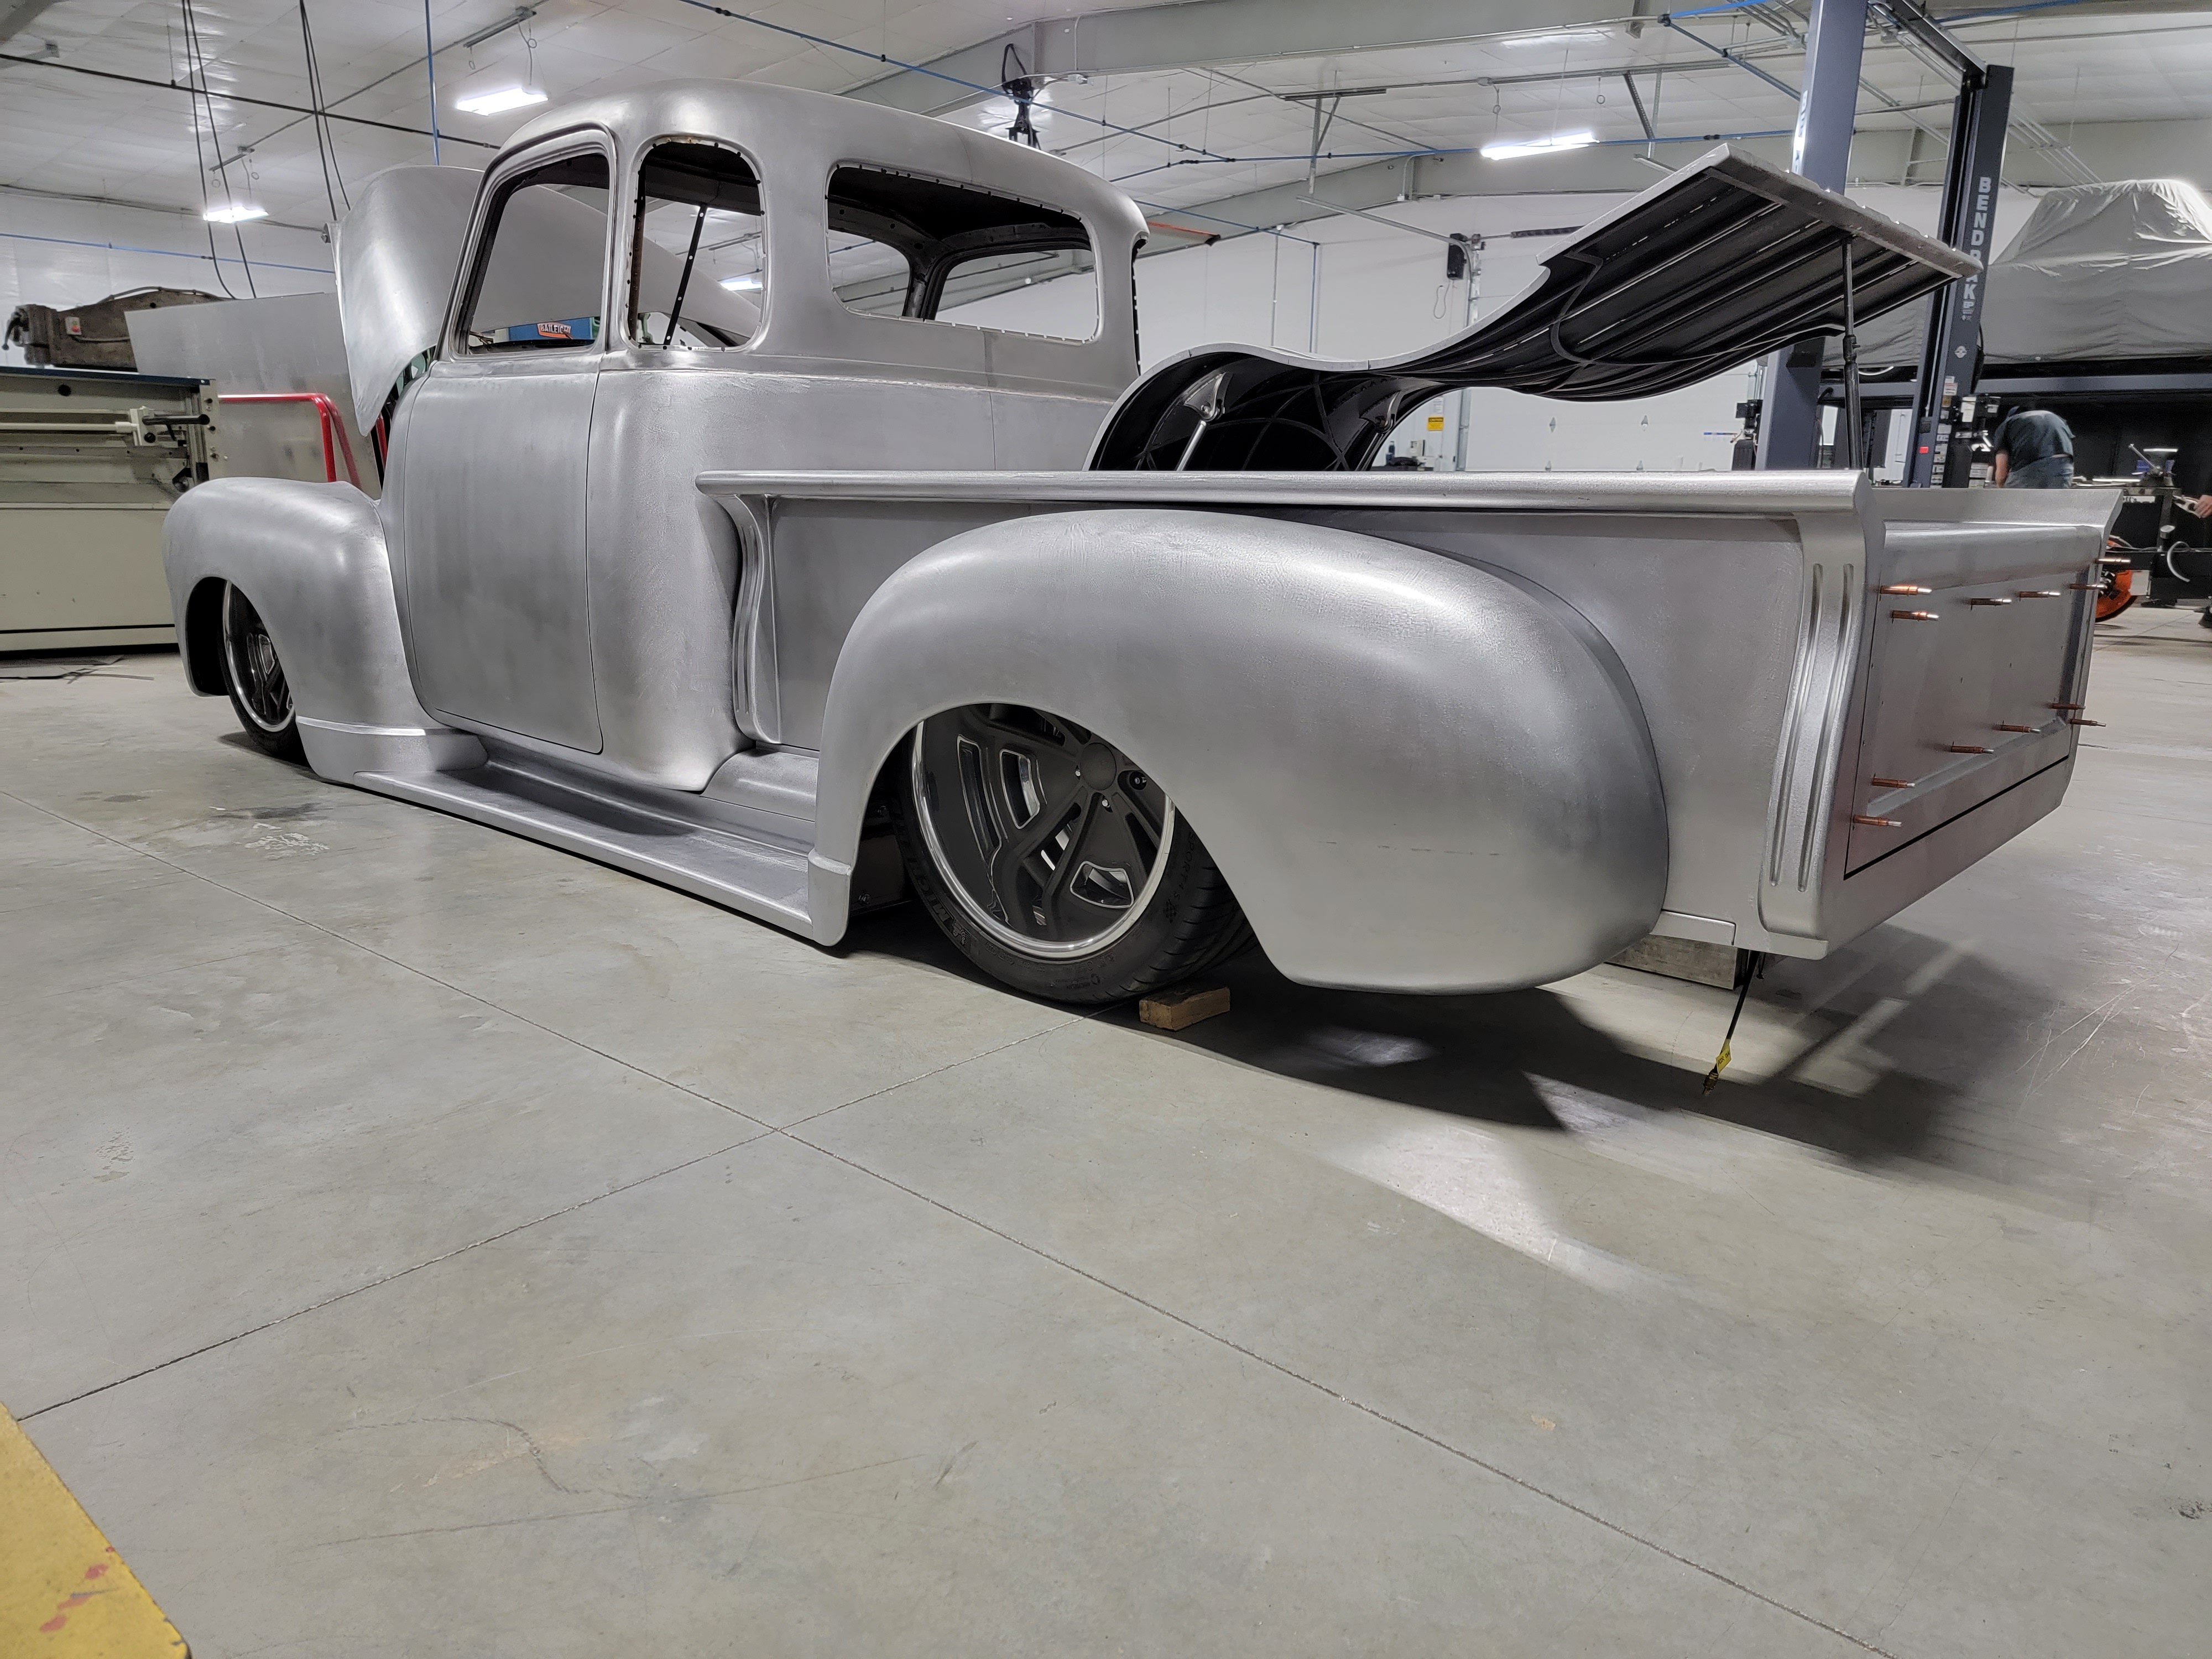 scotts-hotrods-51-chevy-project-truck-2604